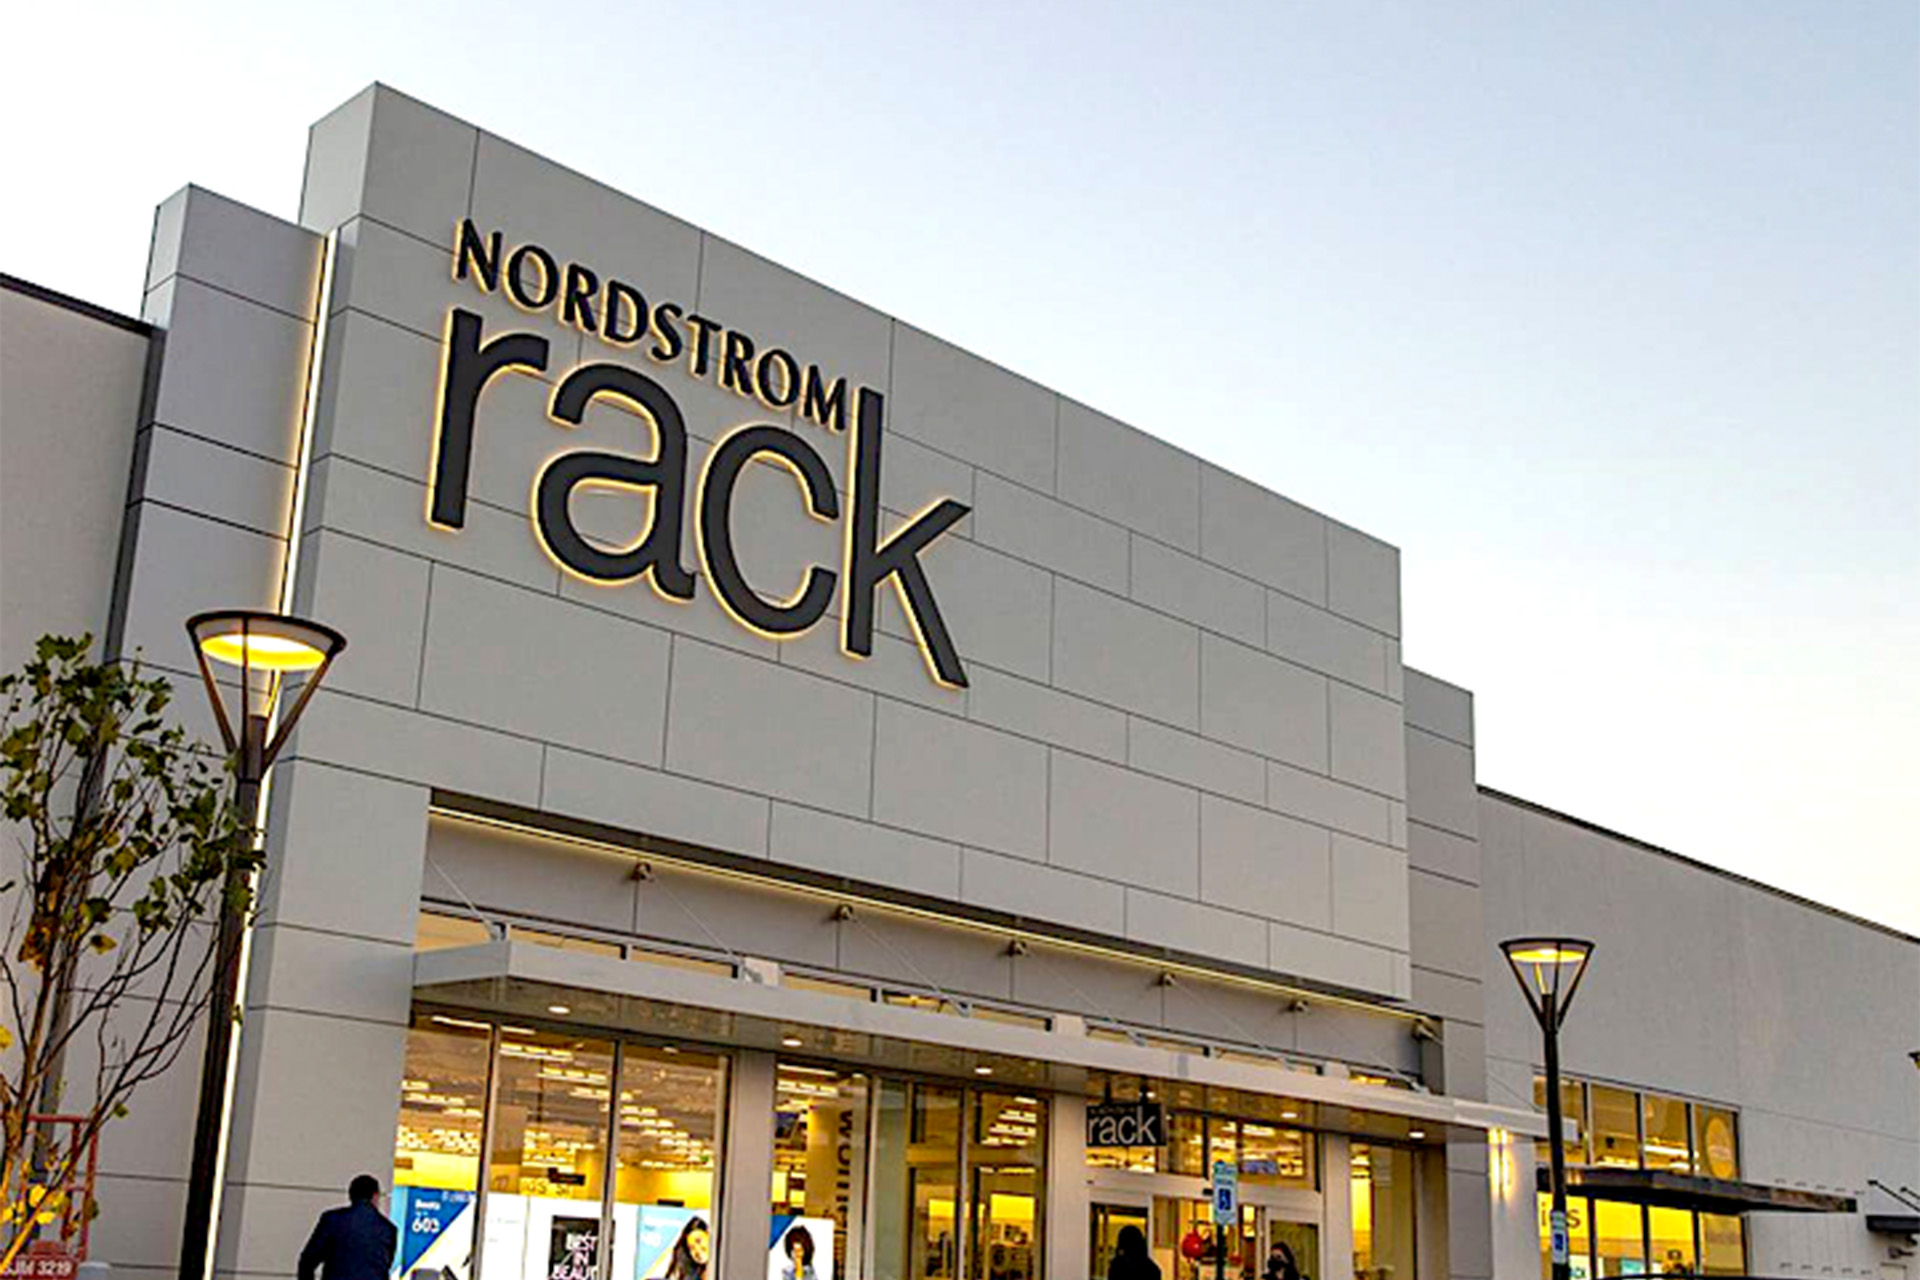 Nordstrom Rack to Open a Store in Fall 2022 at Canyon Springs